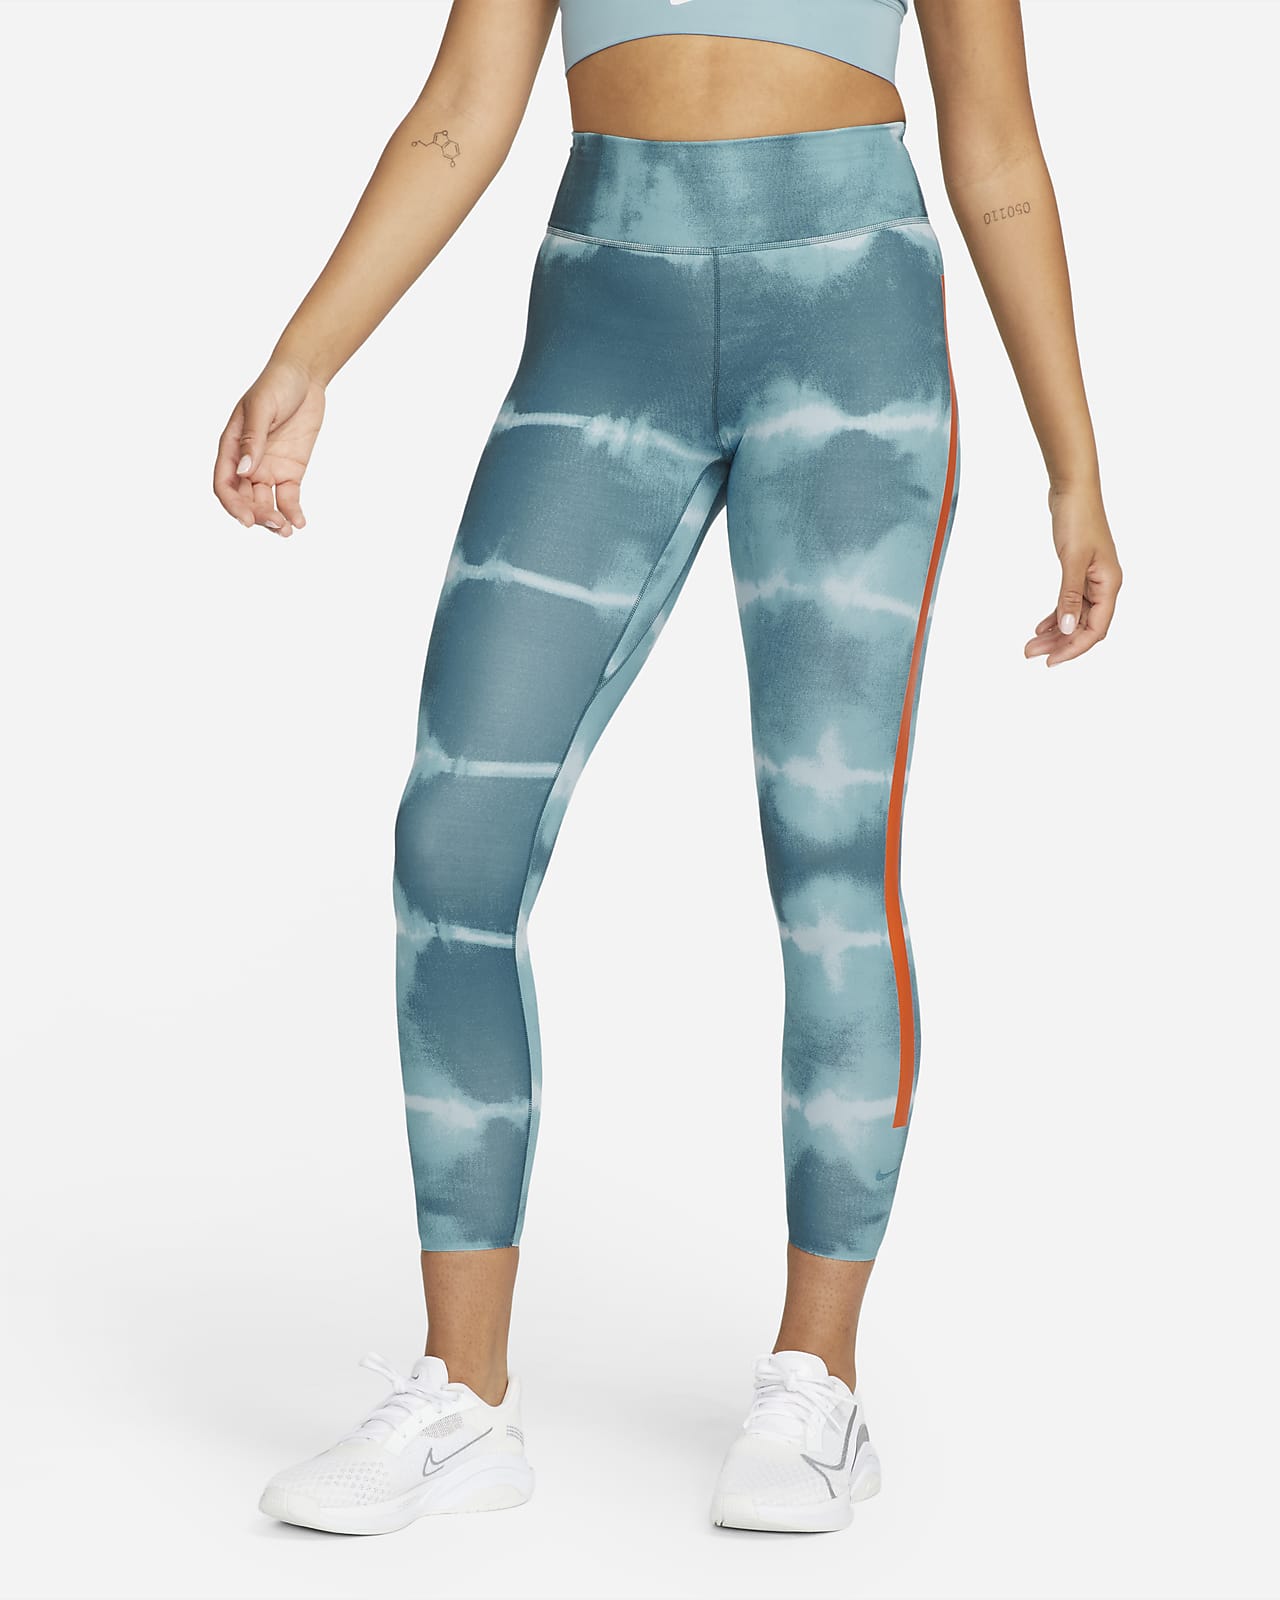 Nike One Luxe Women's Mid-Rise Printed Training Leggings